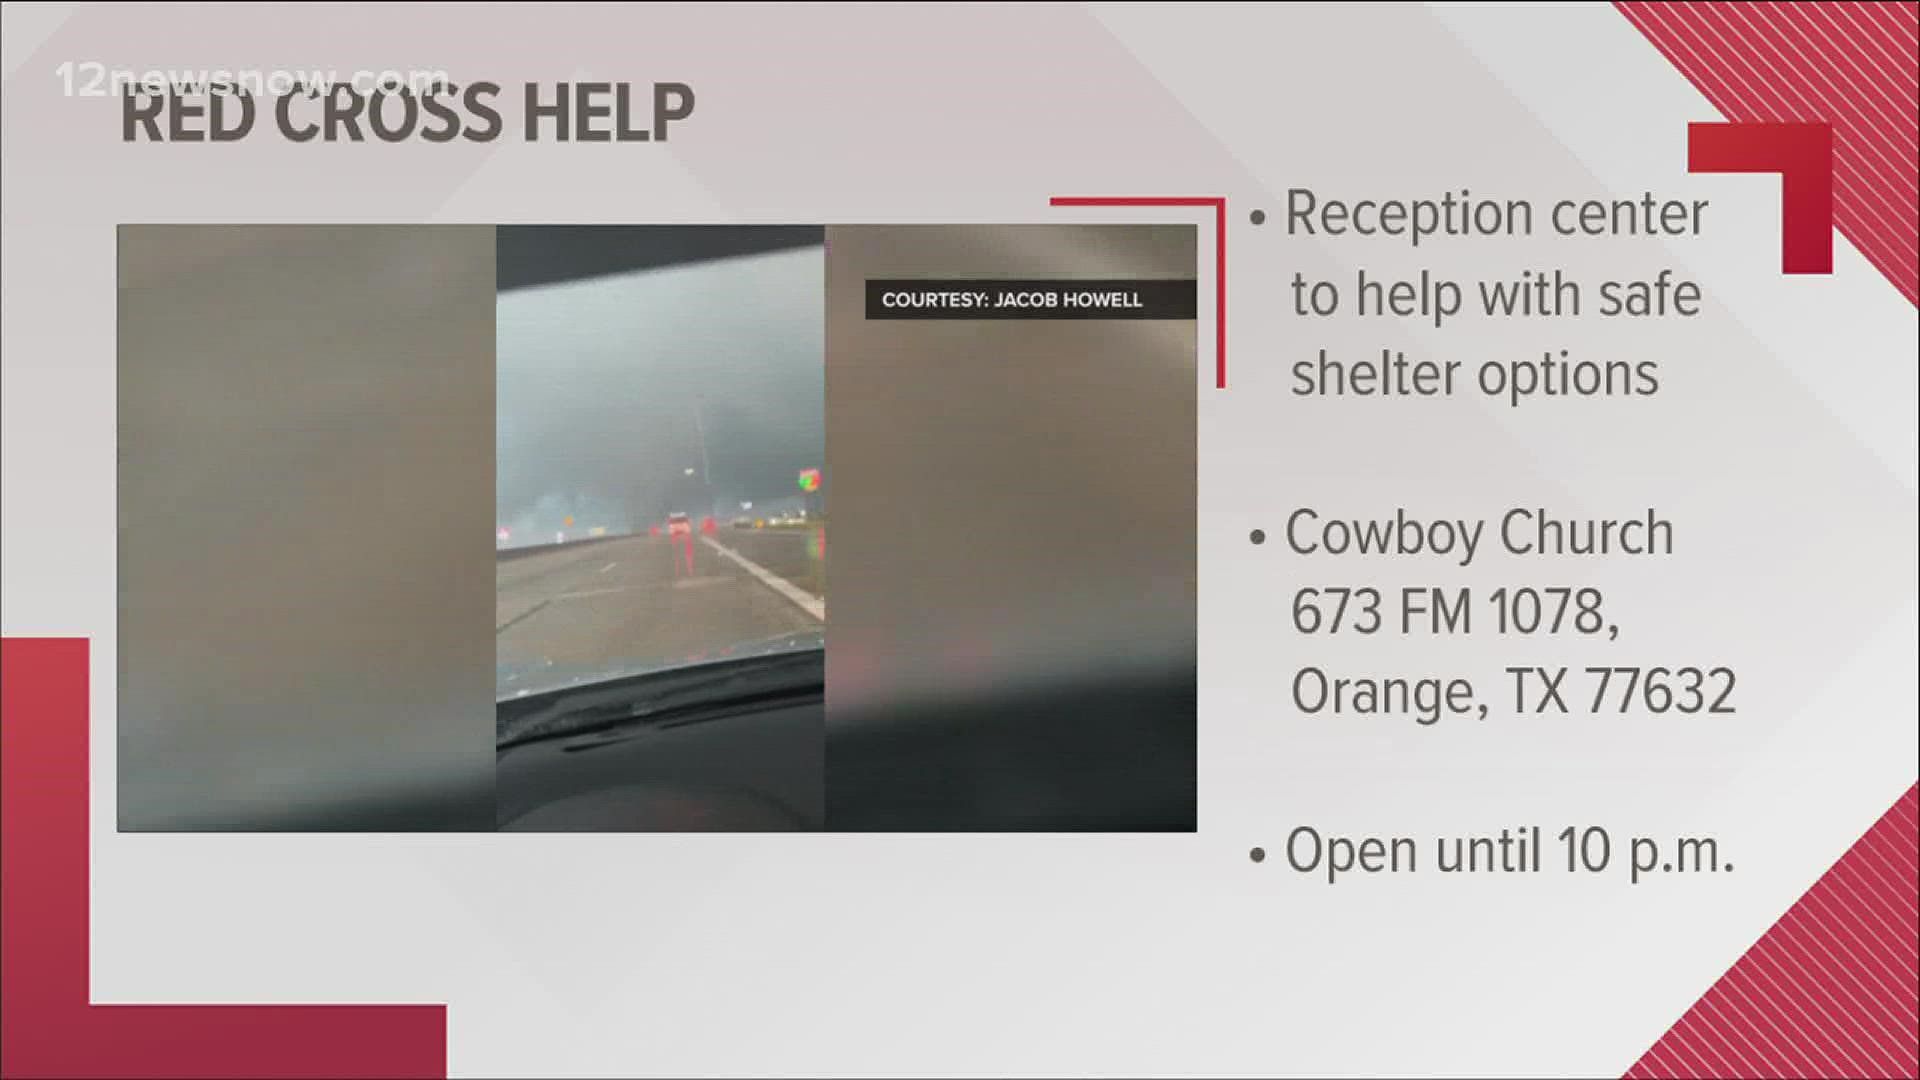 Anyone in need of shelter can go to the Red Cross Reception Center at the Cowboy Church.